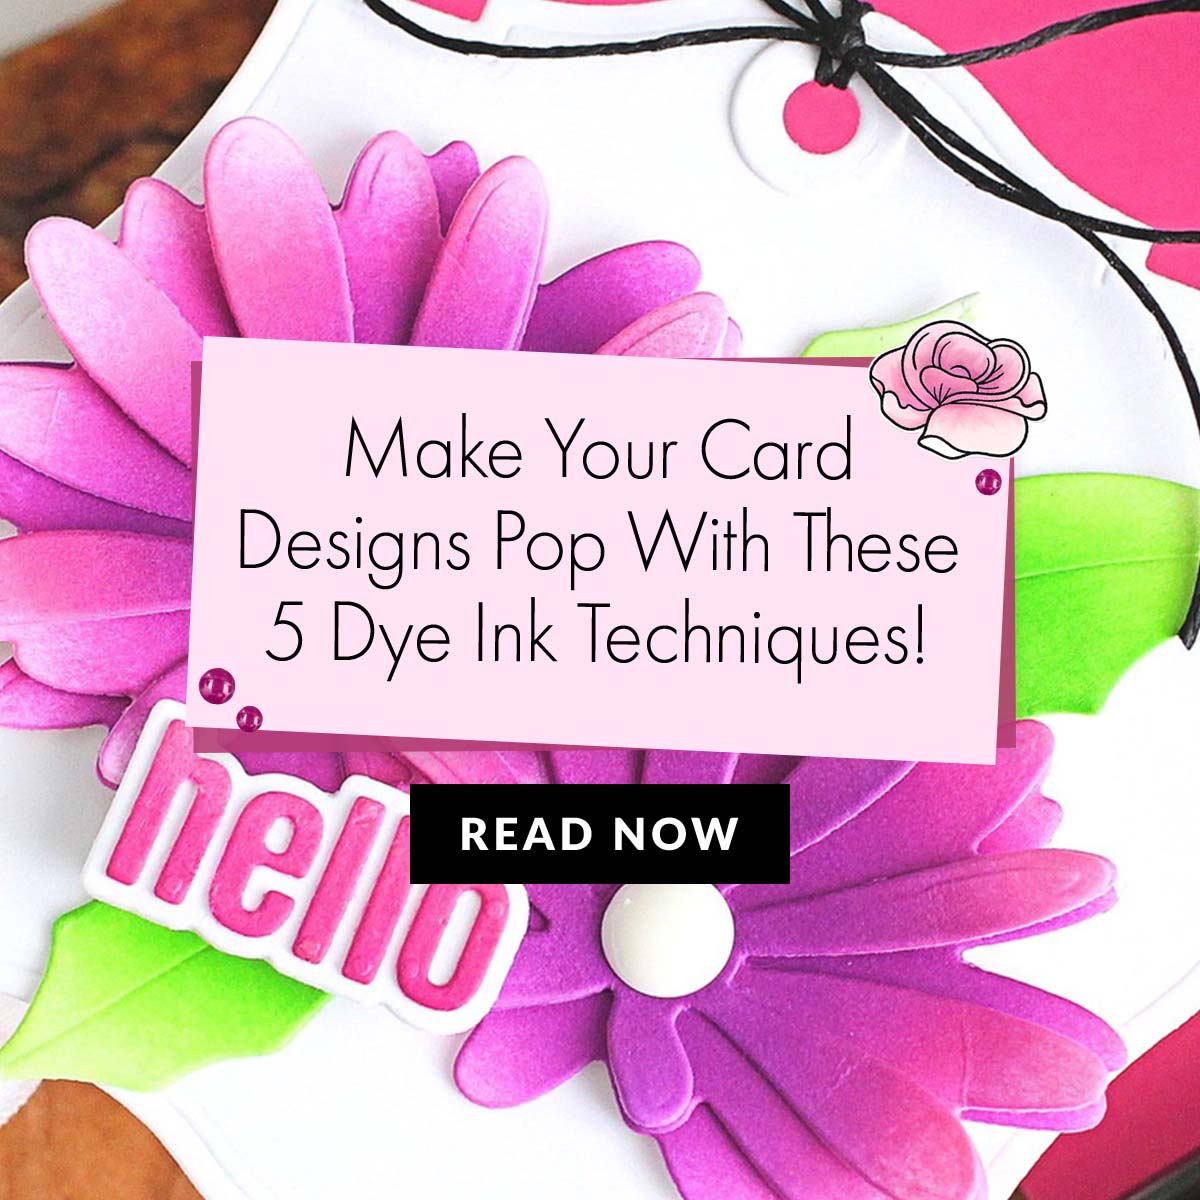 Dye Ink Techniques to Make Your Card Designs Pop!